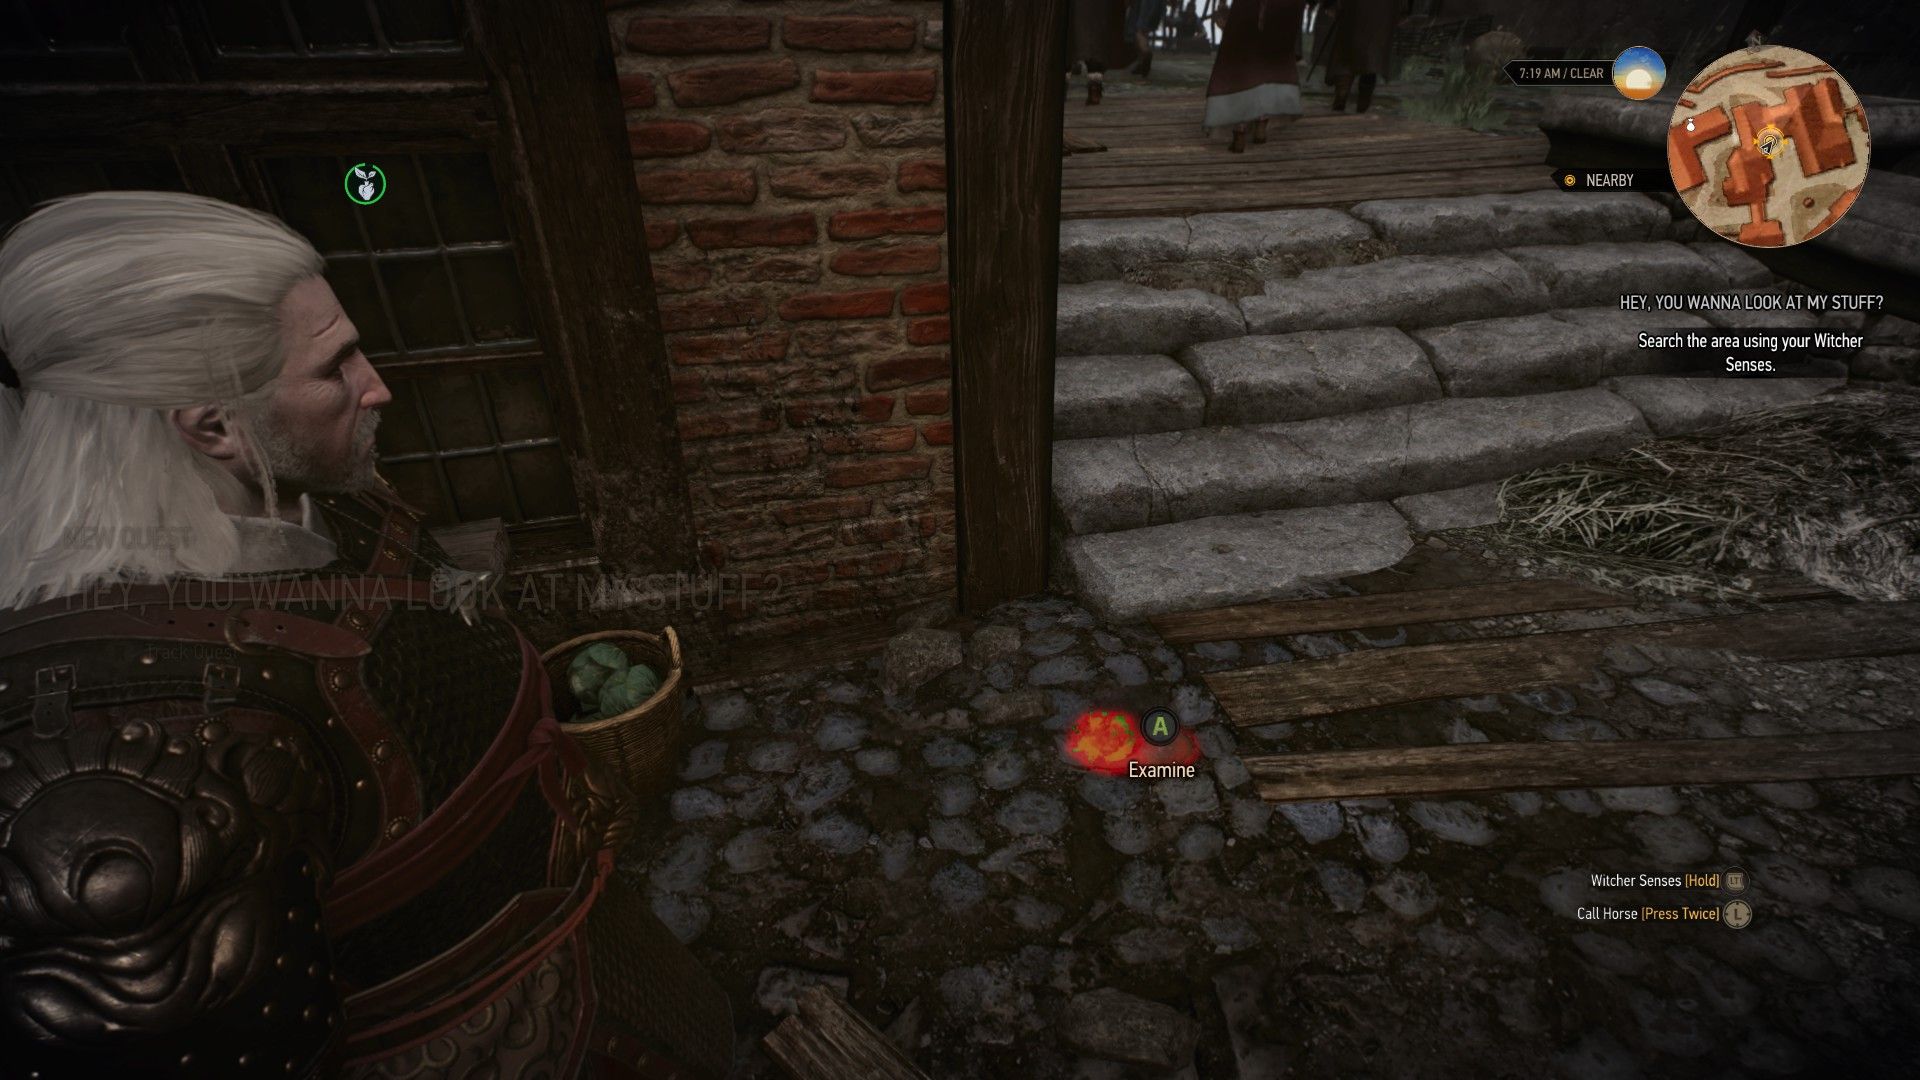 A screenshot of The Witcher 3, showing an item that Geralt can use to sniff out a hidden halfling.